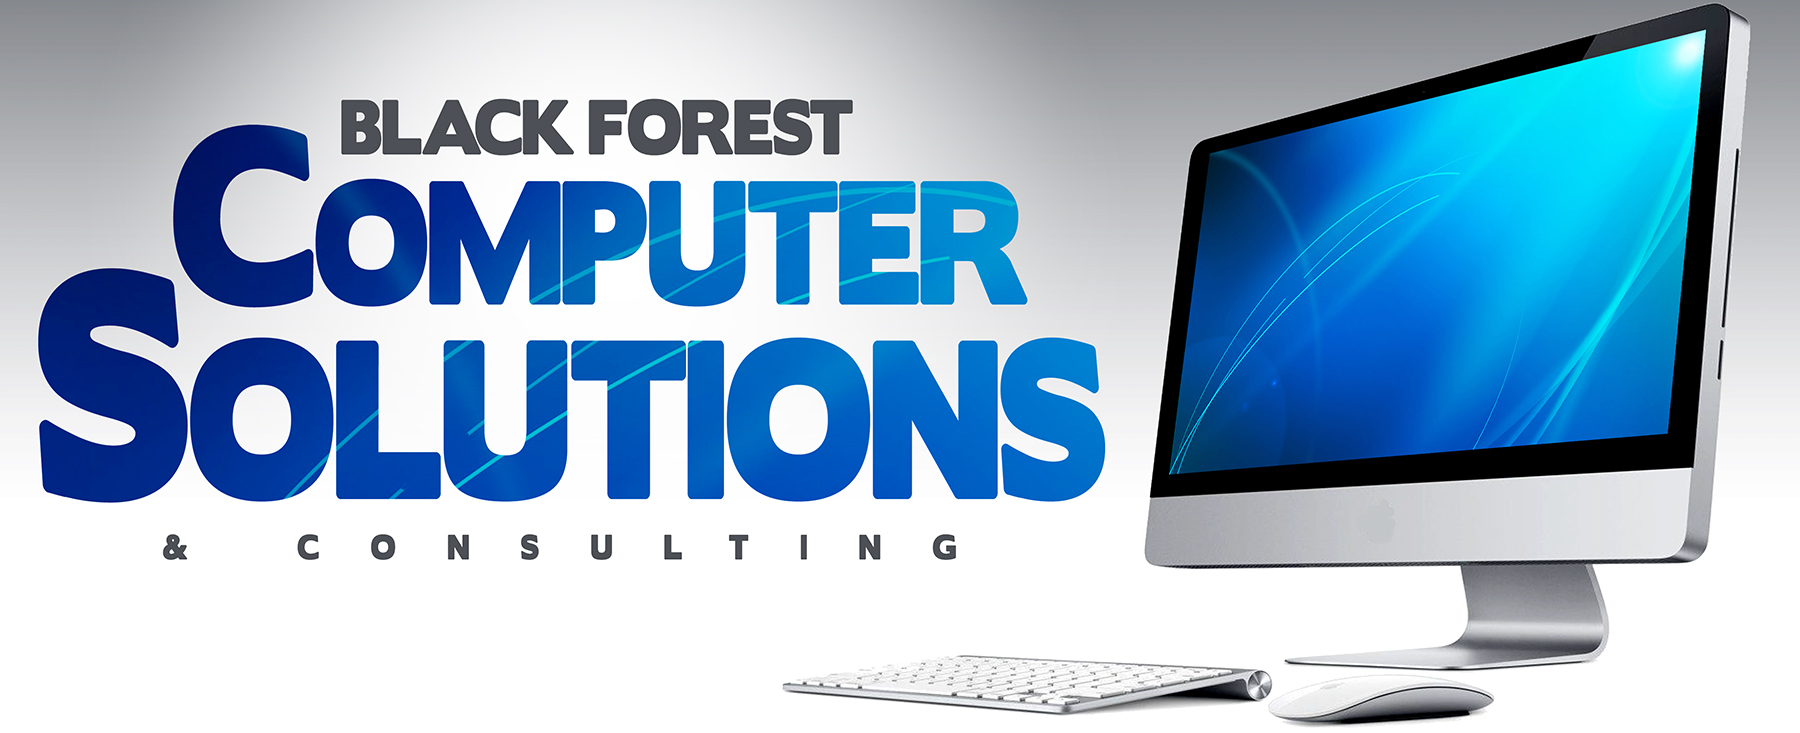 Black Forest Computer Solutions